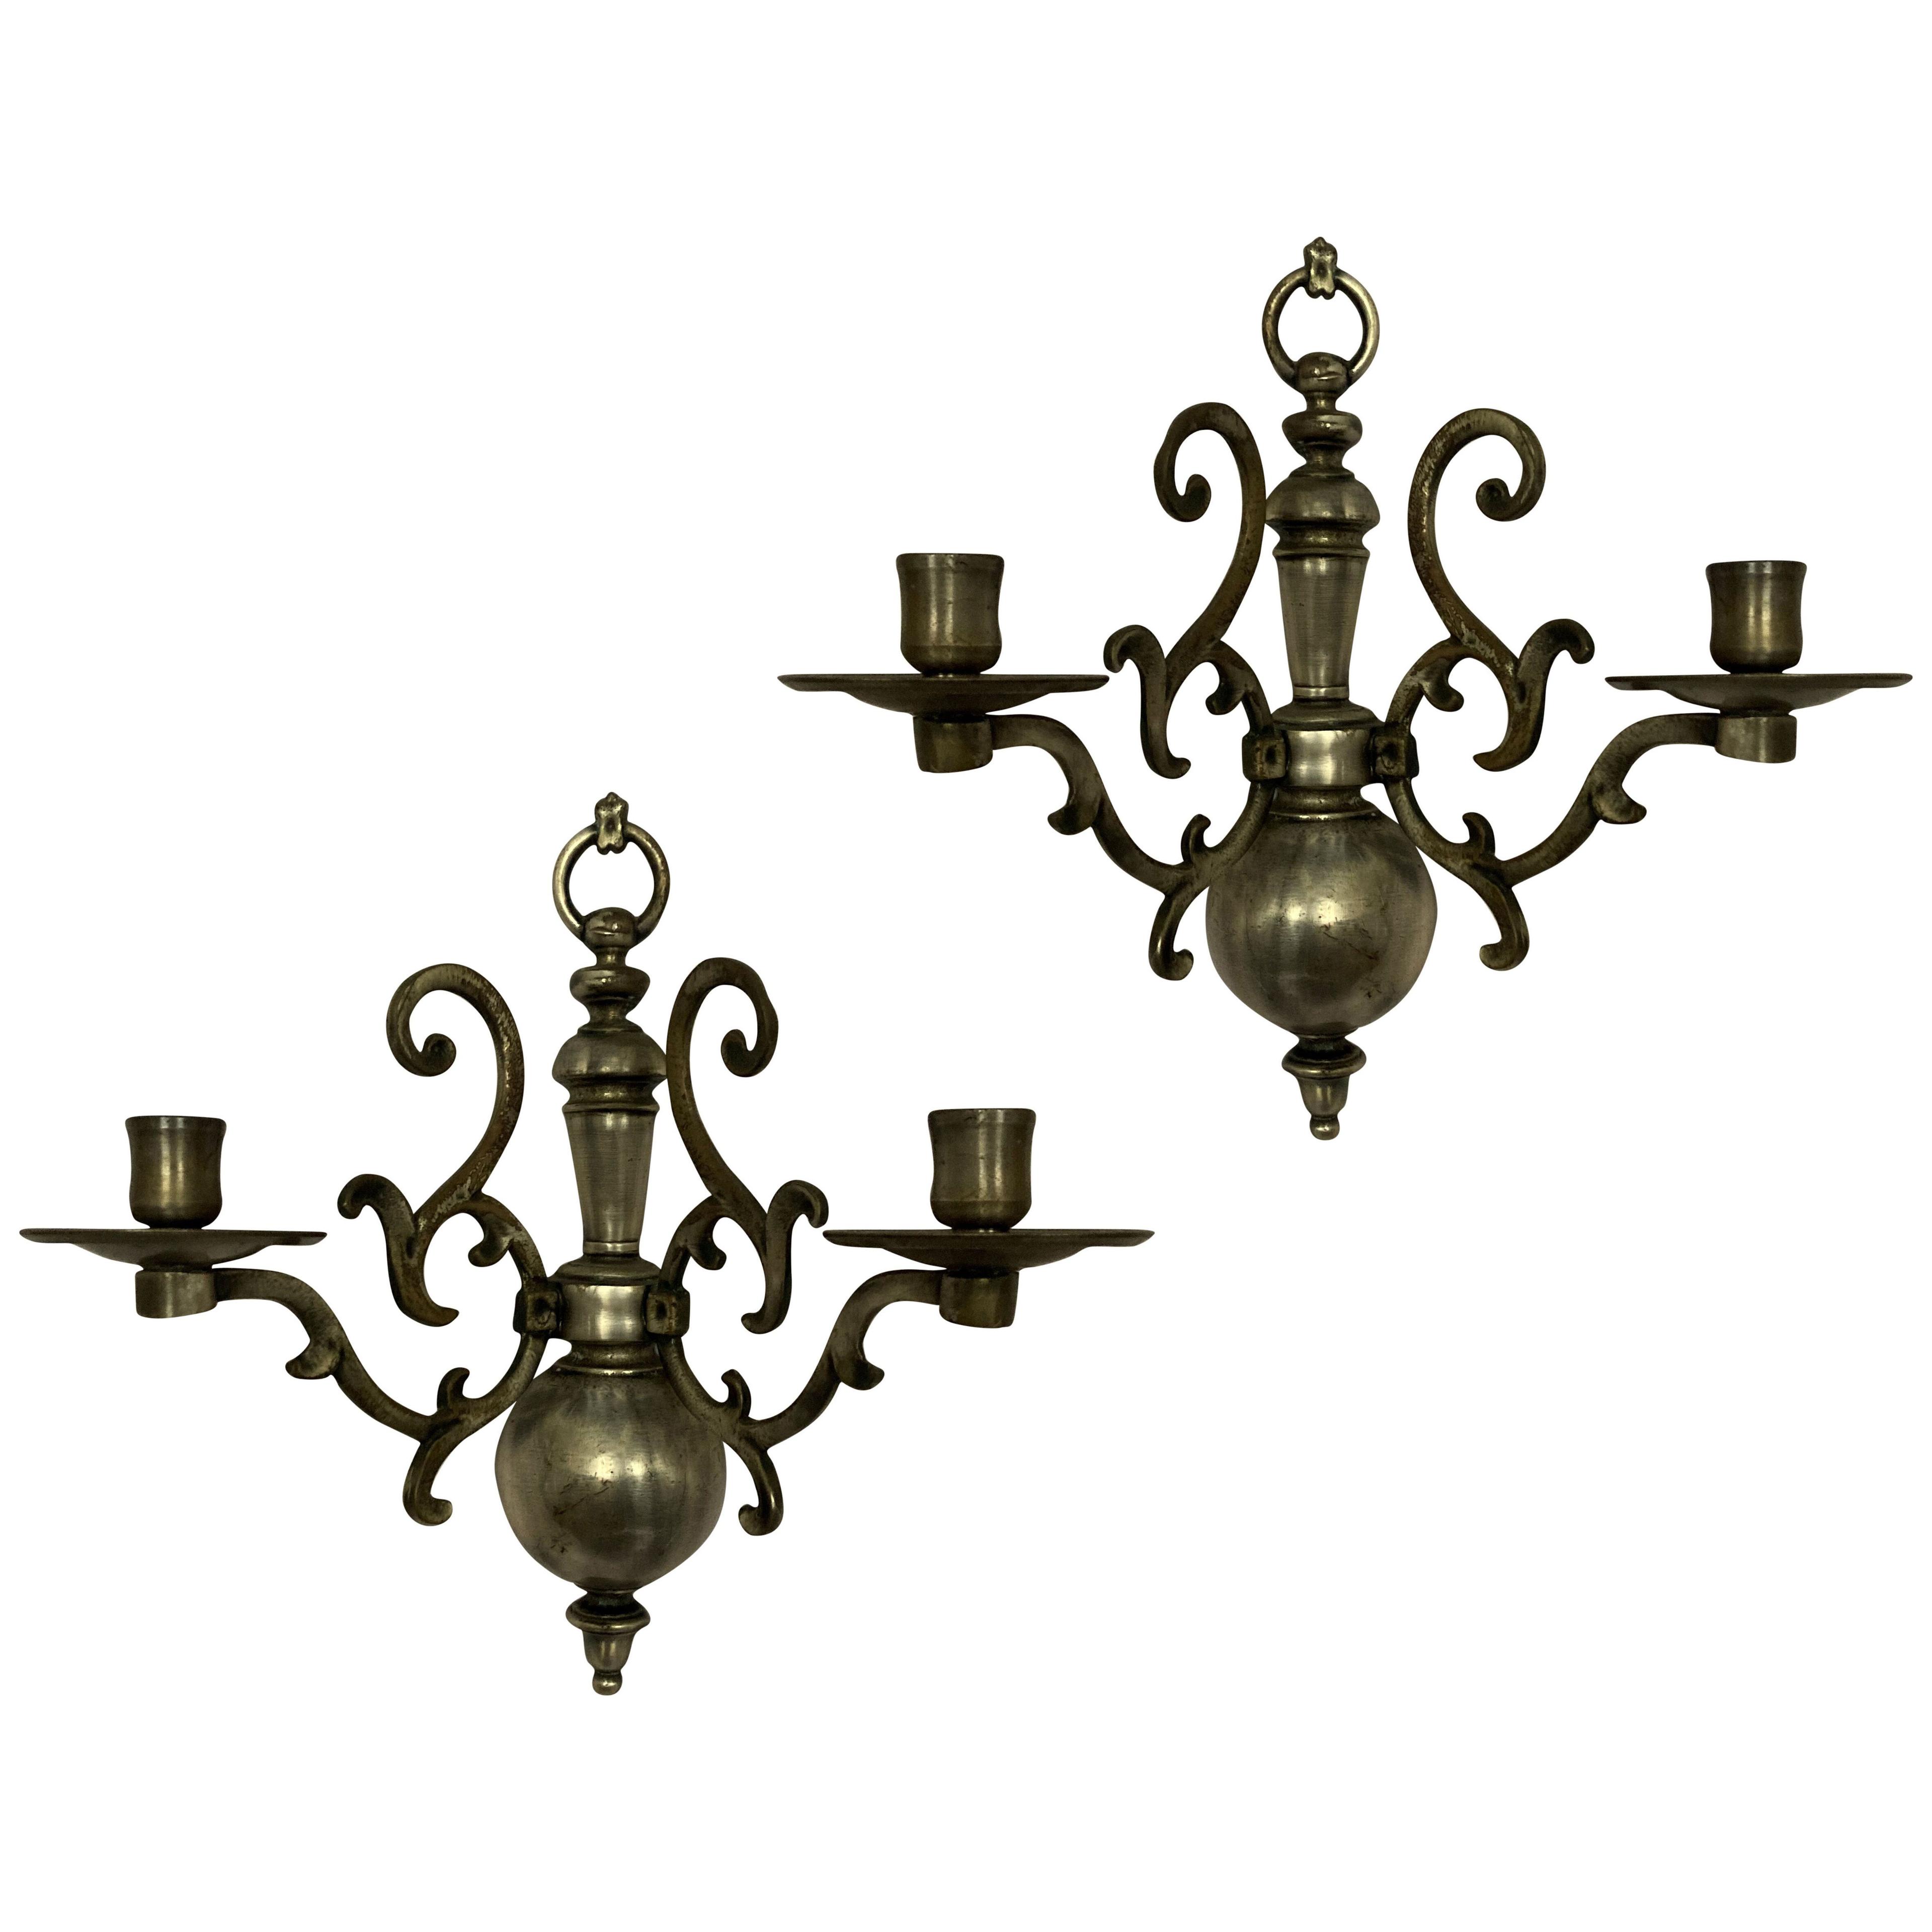 A PAIR OF FLEMISH SILVER PLATED WALL SCONCES